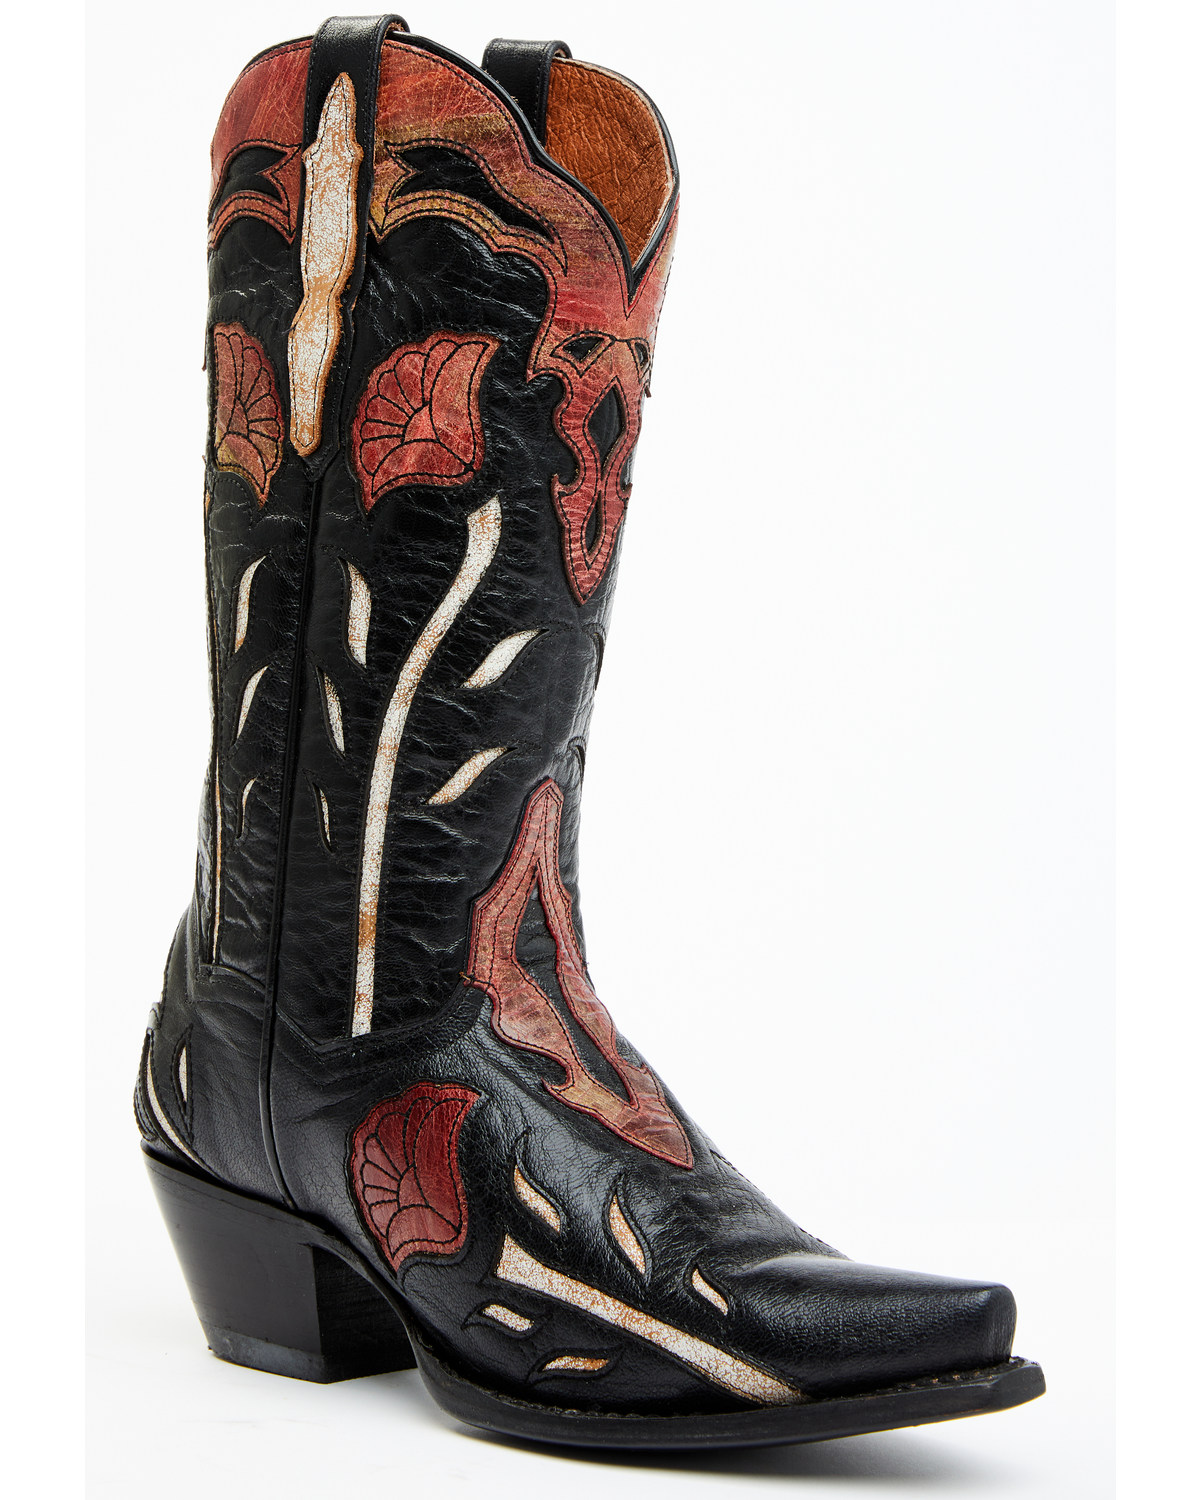 Dan Post Women's Alyssia Floral Leather Tall Western Boots - Snip Toe